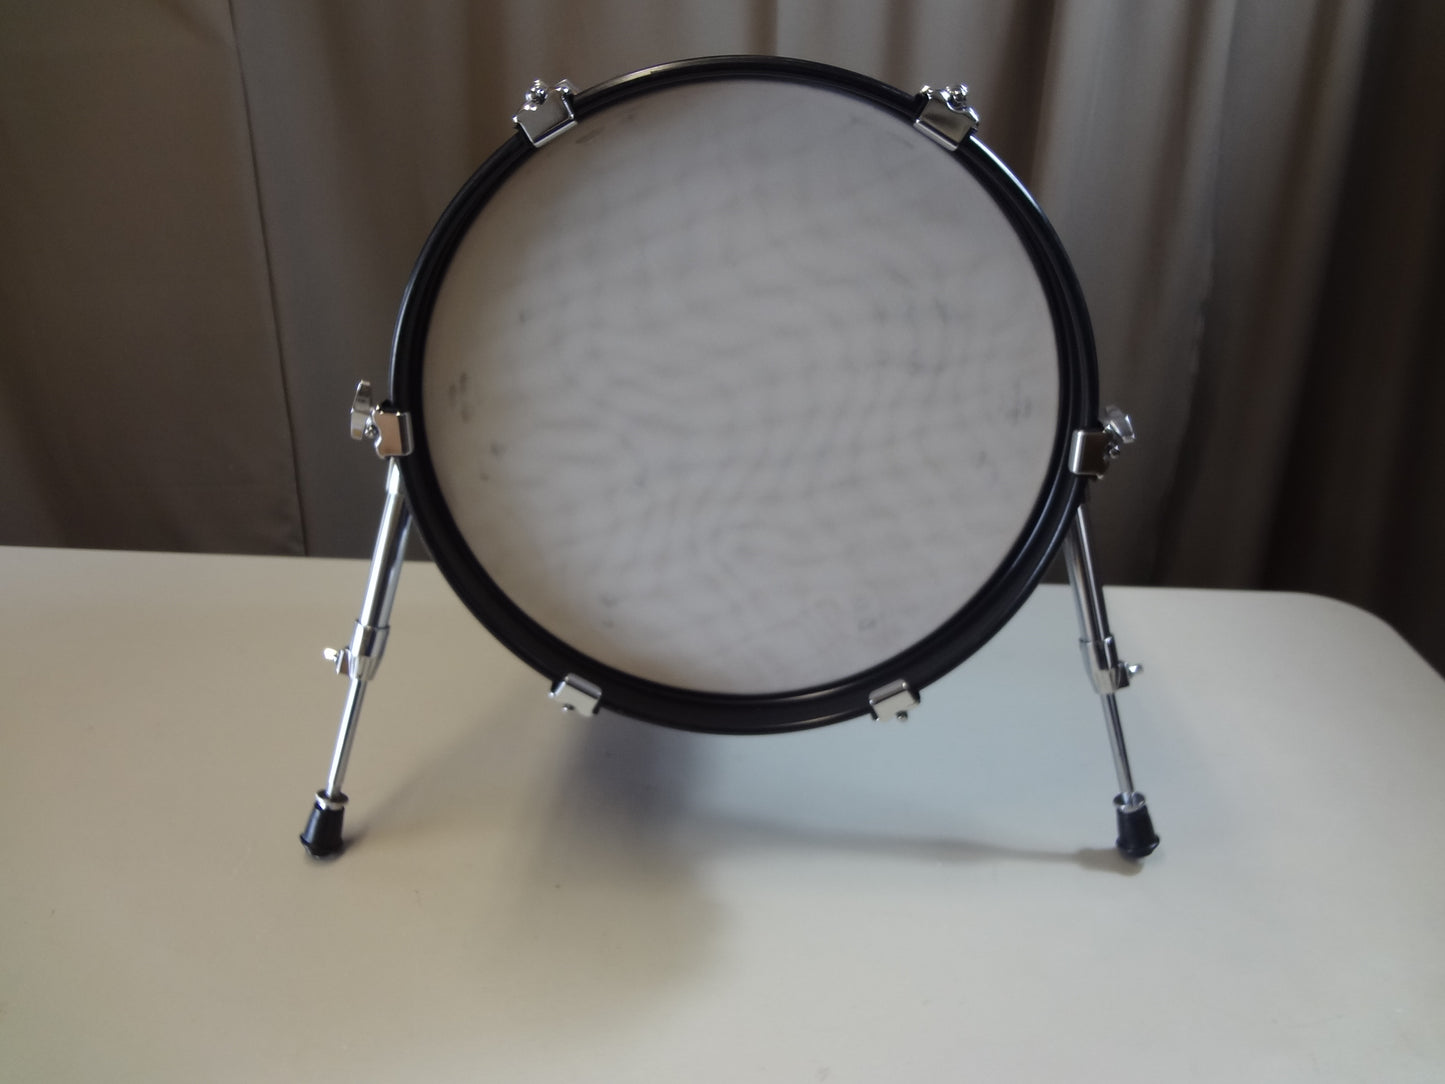 5 PIECE CUSTOM BUILT ELECTRONIC DRUM KIT - (ELECTRONIC CYMBALS AND HARDWARE INCLUDED)